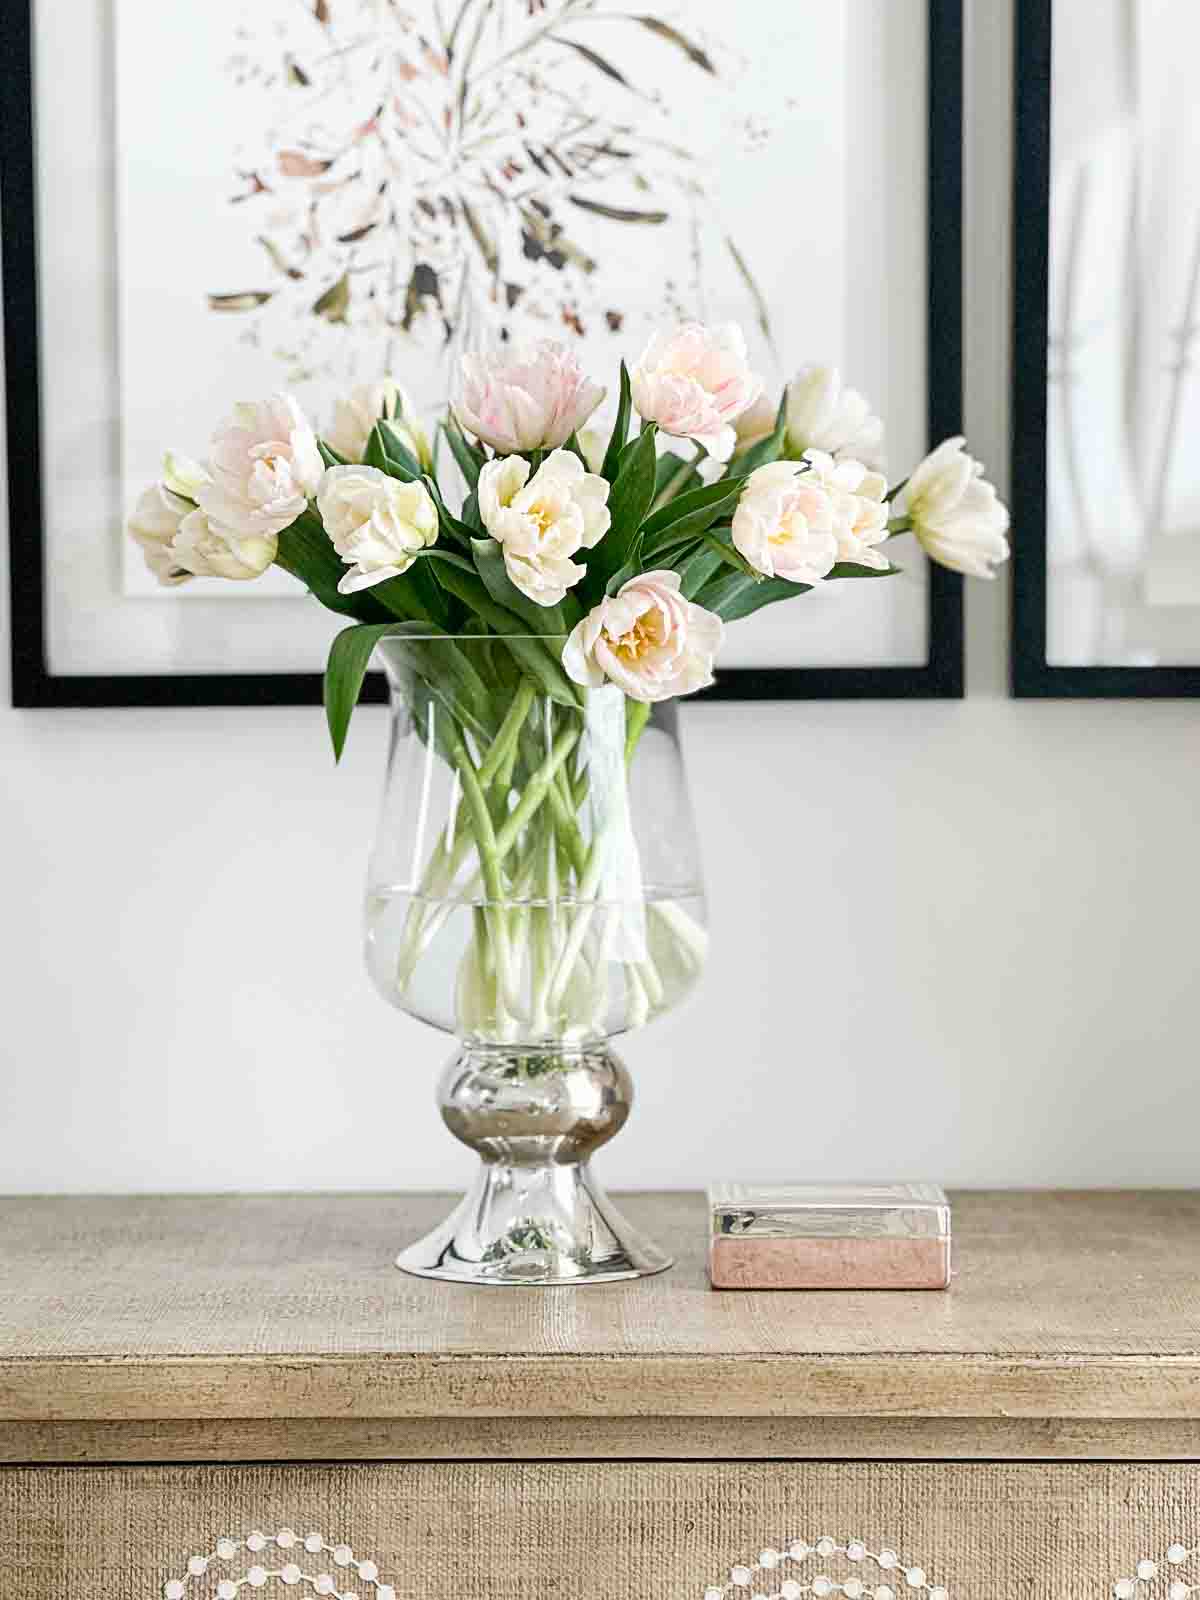 How To Care For Cut Tulips So They Last Longer